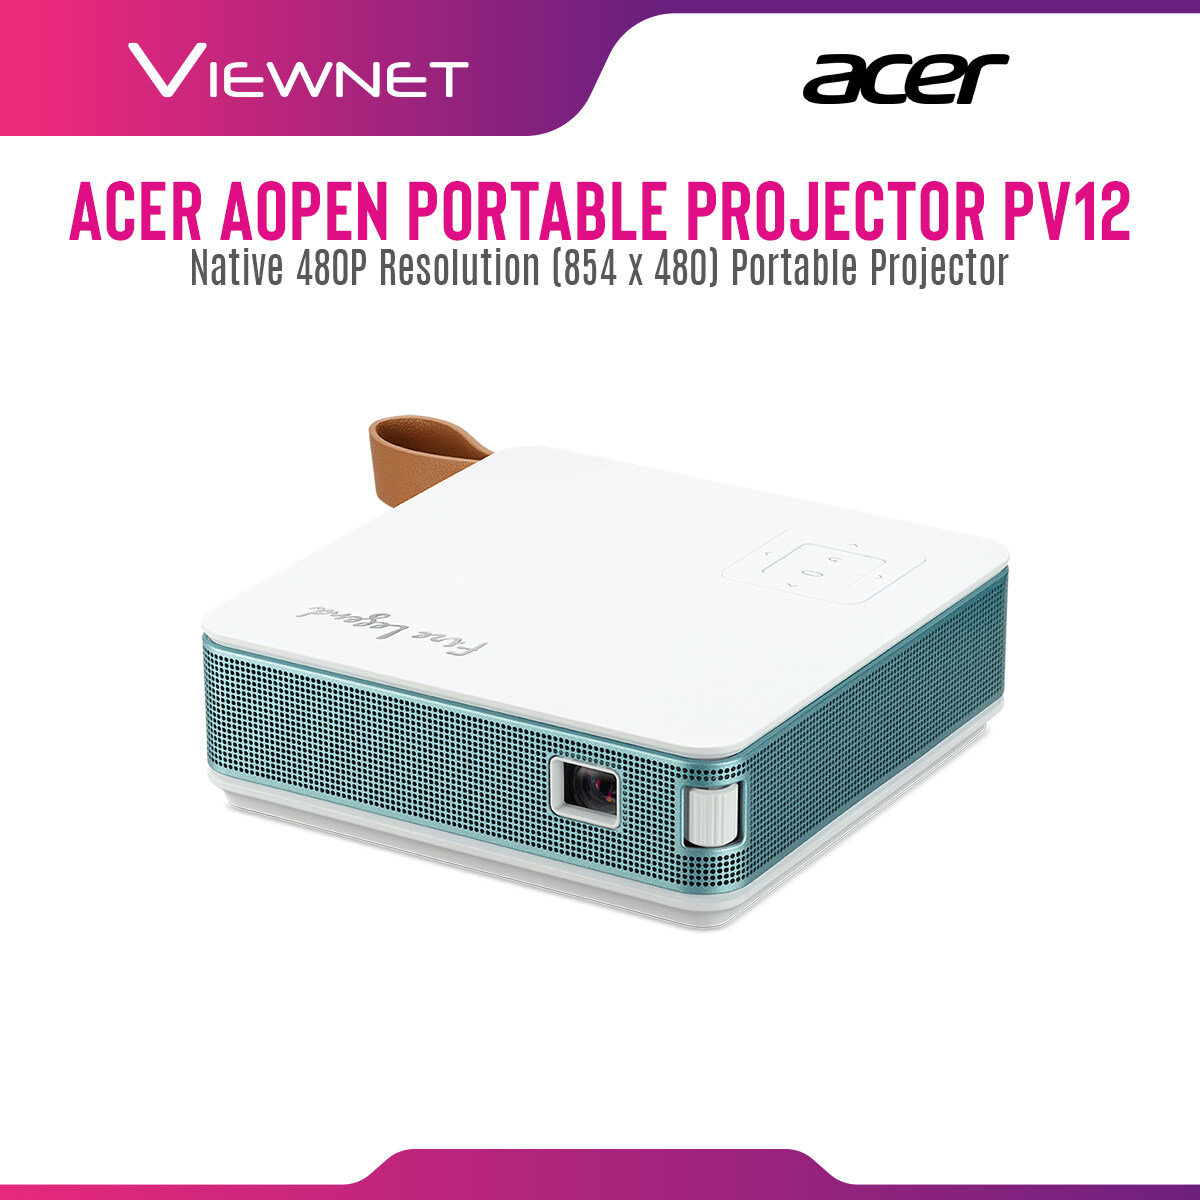 Acer Aopen Portable Projector PV12 with Native 854 x 480 Resolution, 700 Lumens, 30,000 Hours Hours Lamp Life